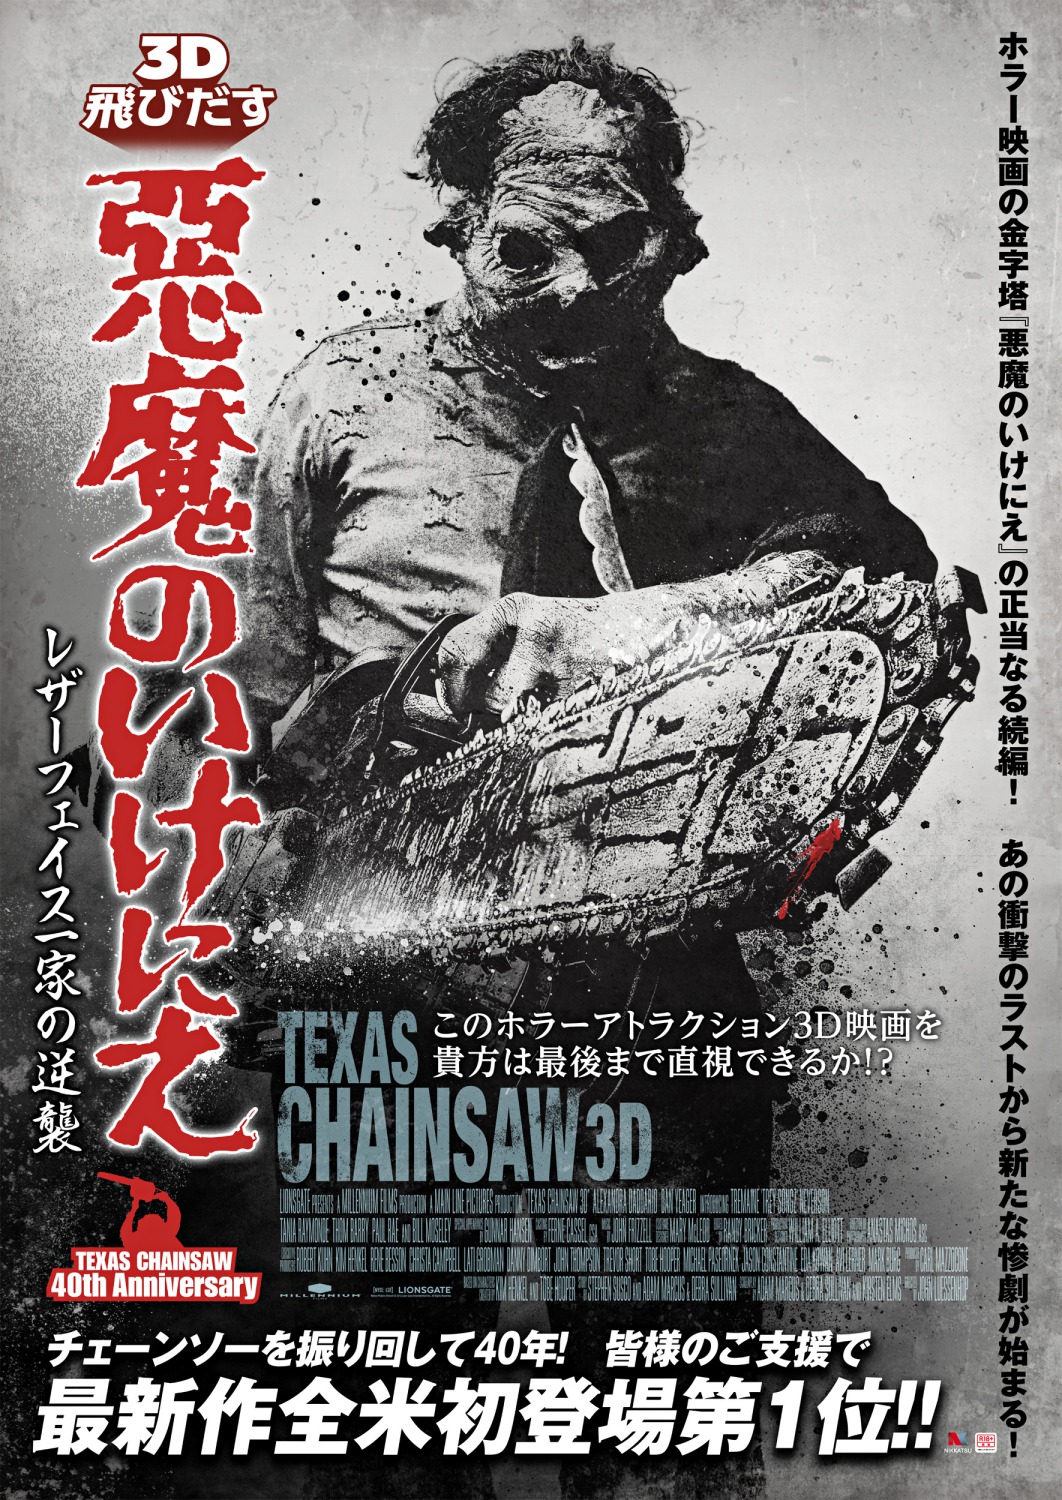 Extra Large Movie Poster Image for Texas Chainsaw 3D (#5 of 5)